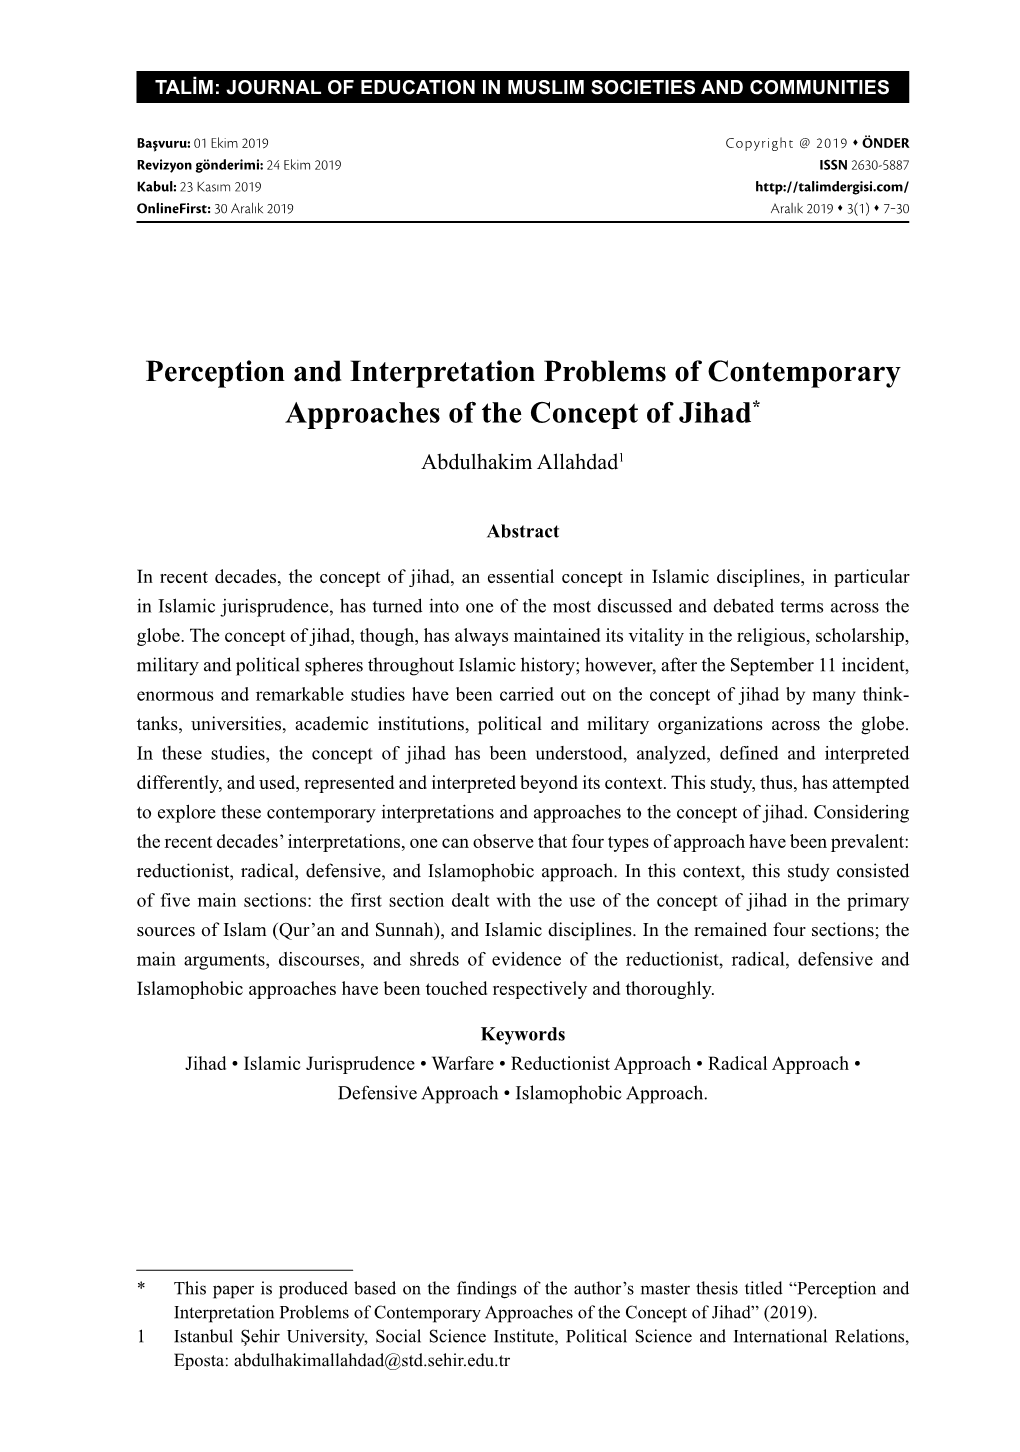 Perception and Interpretation Problems of Contemporary Approaches of the Concept of Jihad*